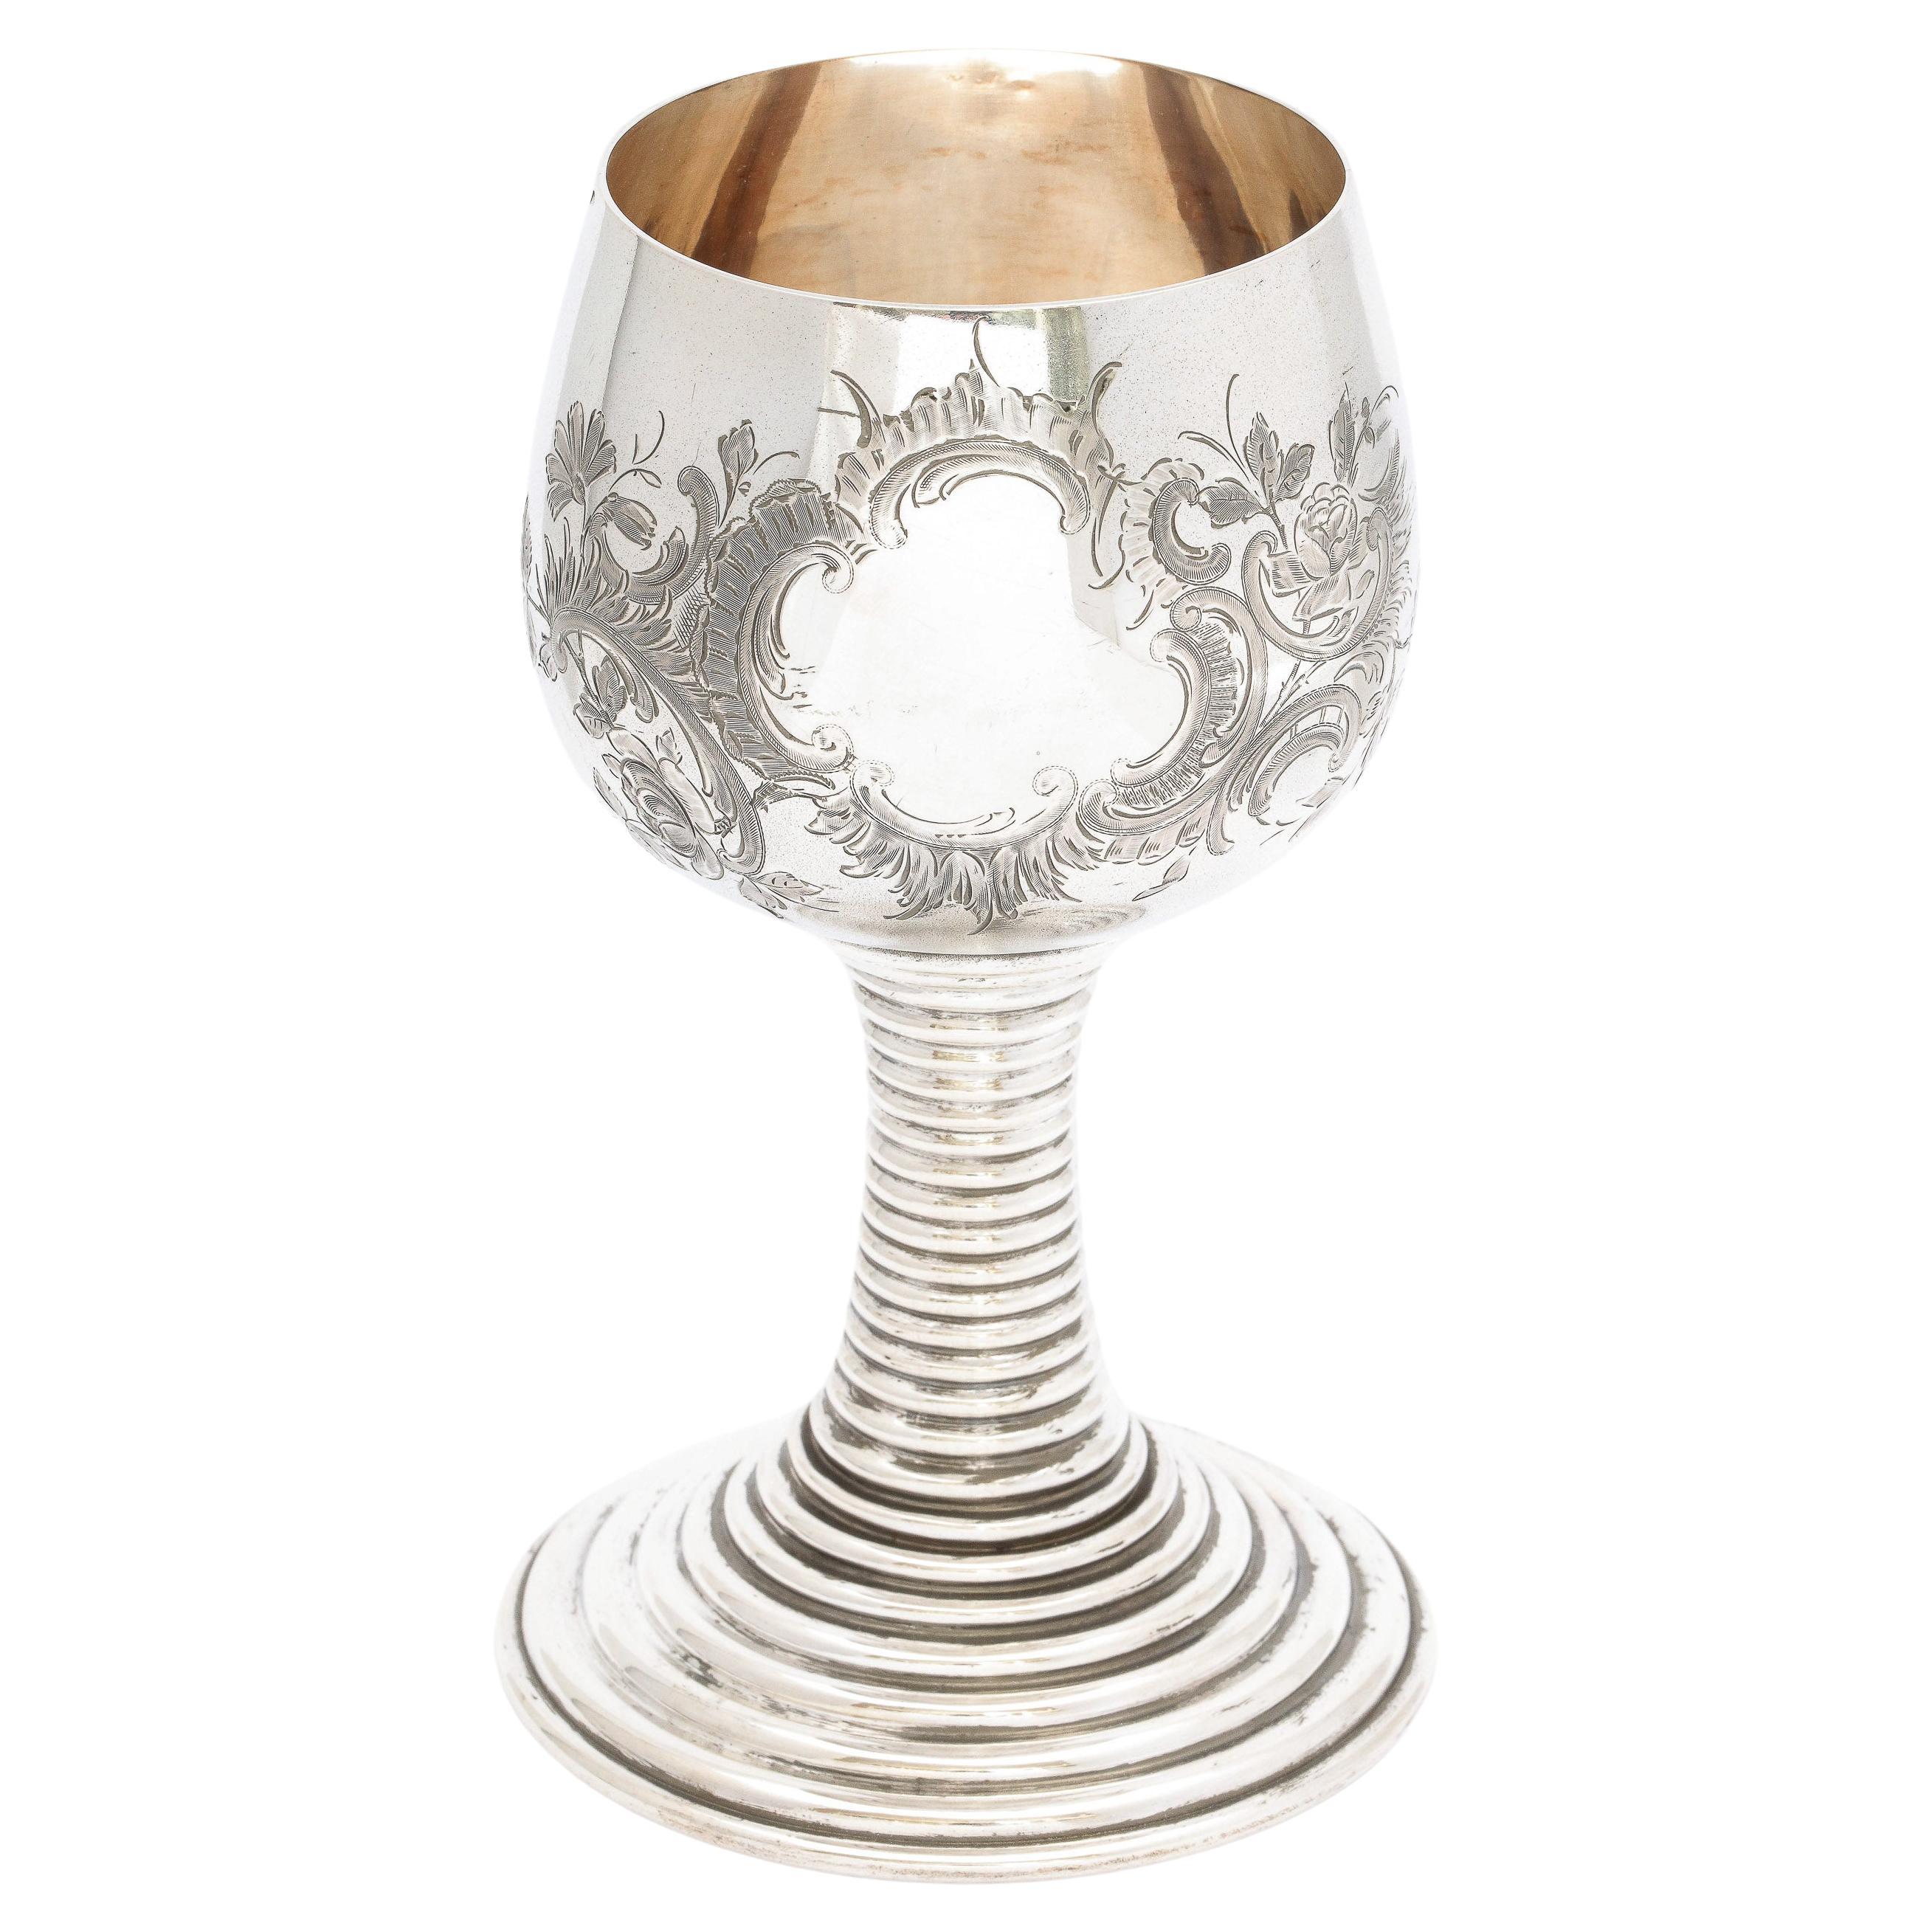 Medieval/15th Century-Style Continental Silver '.800' Roemer/ Rummer Goblet